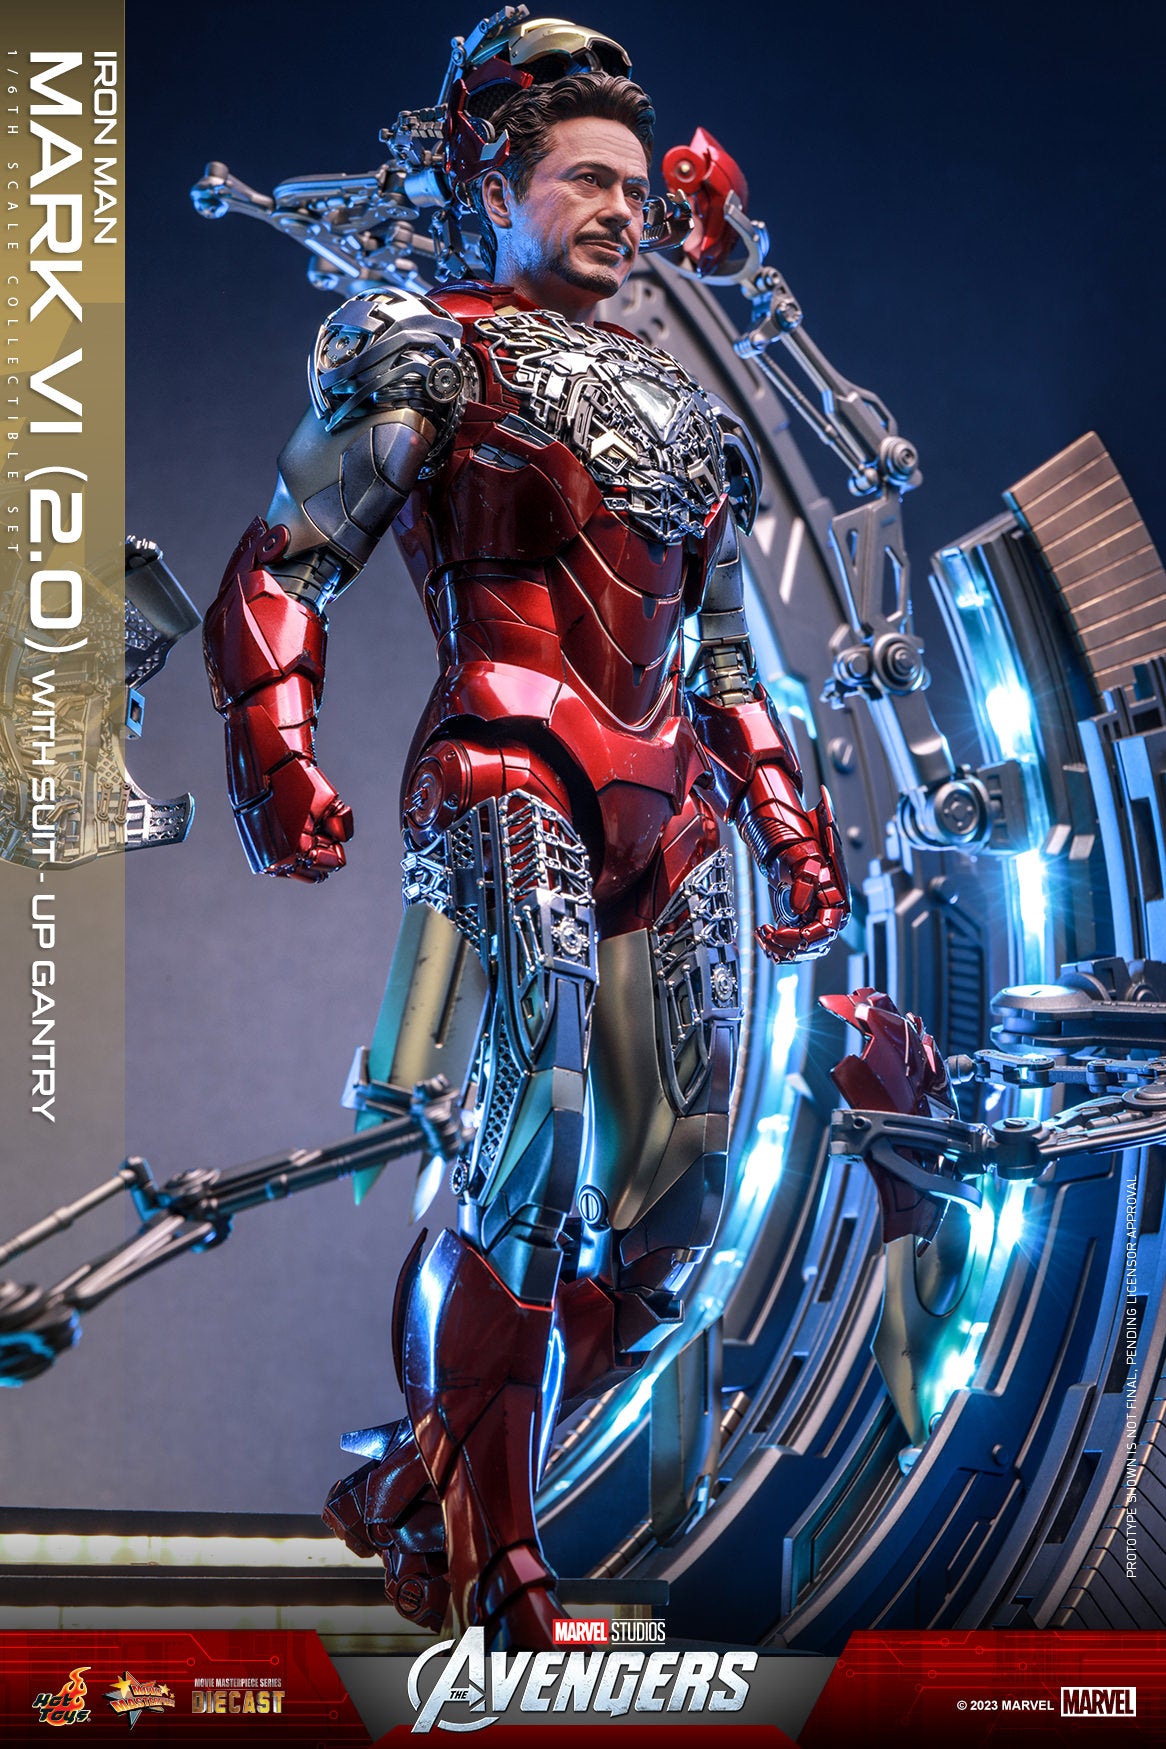 Iron Man: Mark VI (2.0): With Suit Up Gantry: Marvel: MMS688D53: Hot Toys